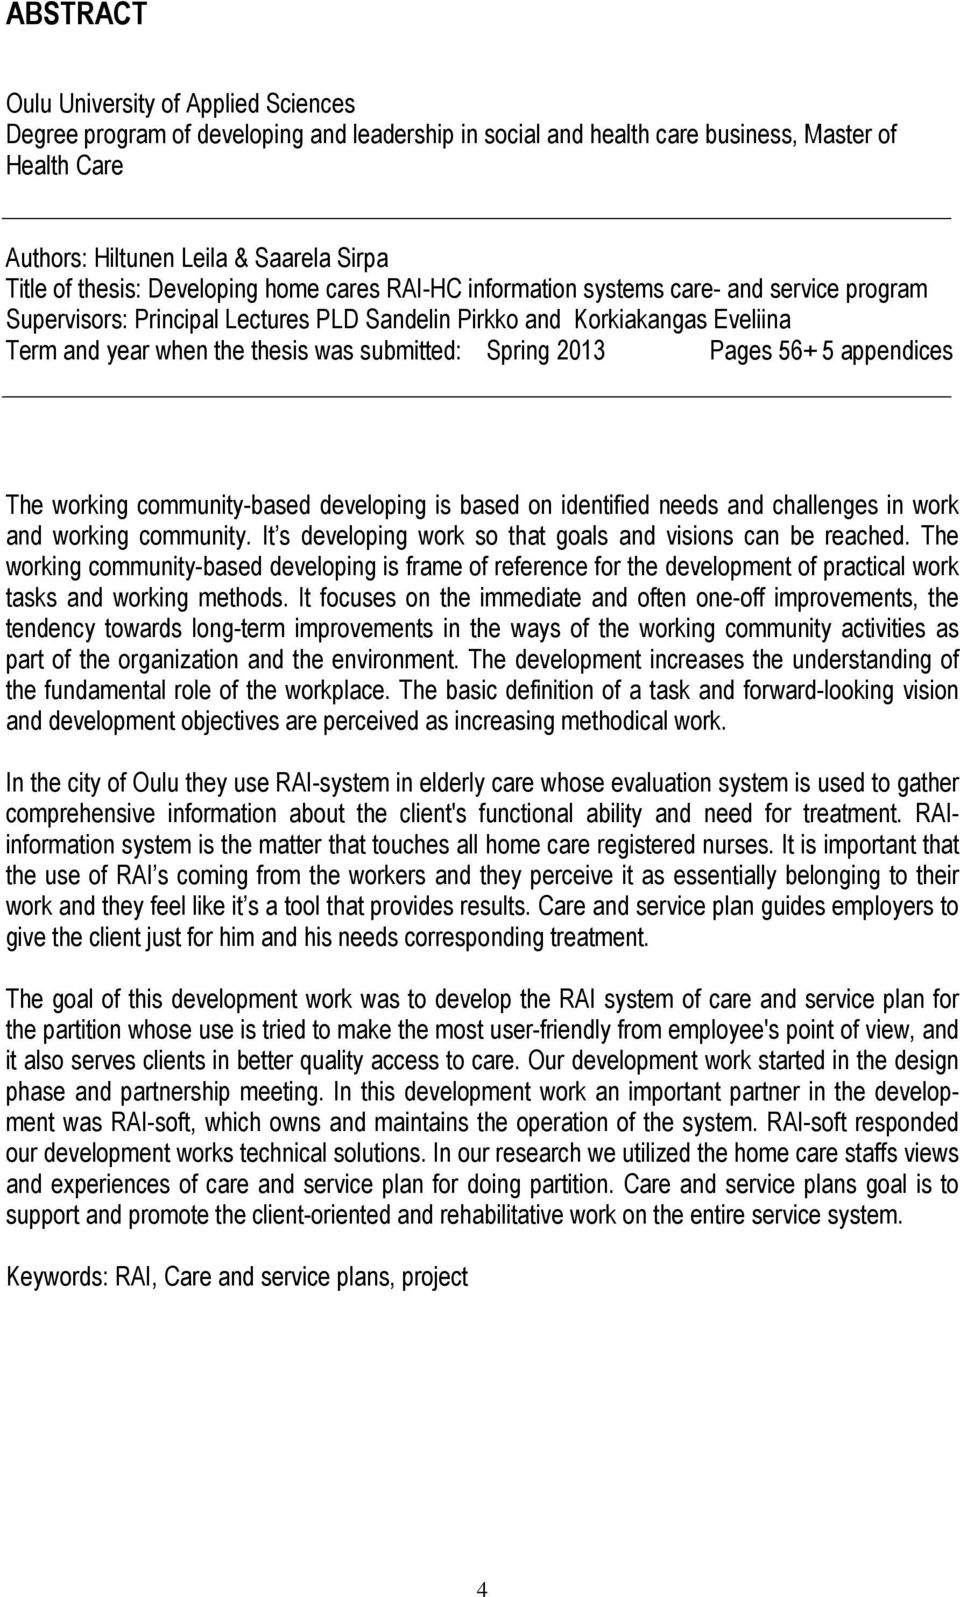 submitted: Spring 2013 Pages 56+ 5 appendices The working community-based developing is based on identified needs and challenges in work and working community.